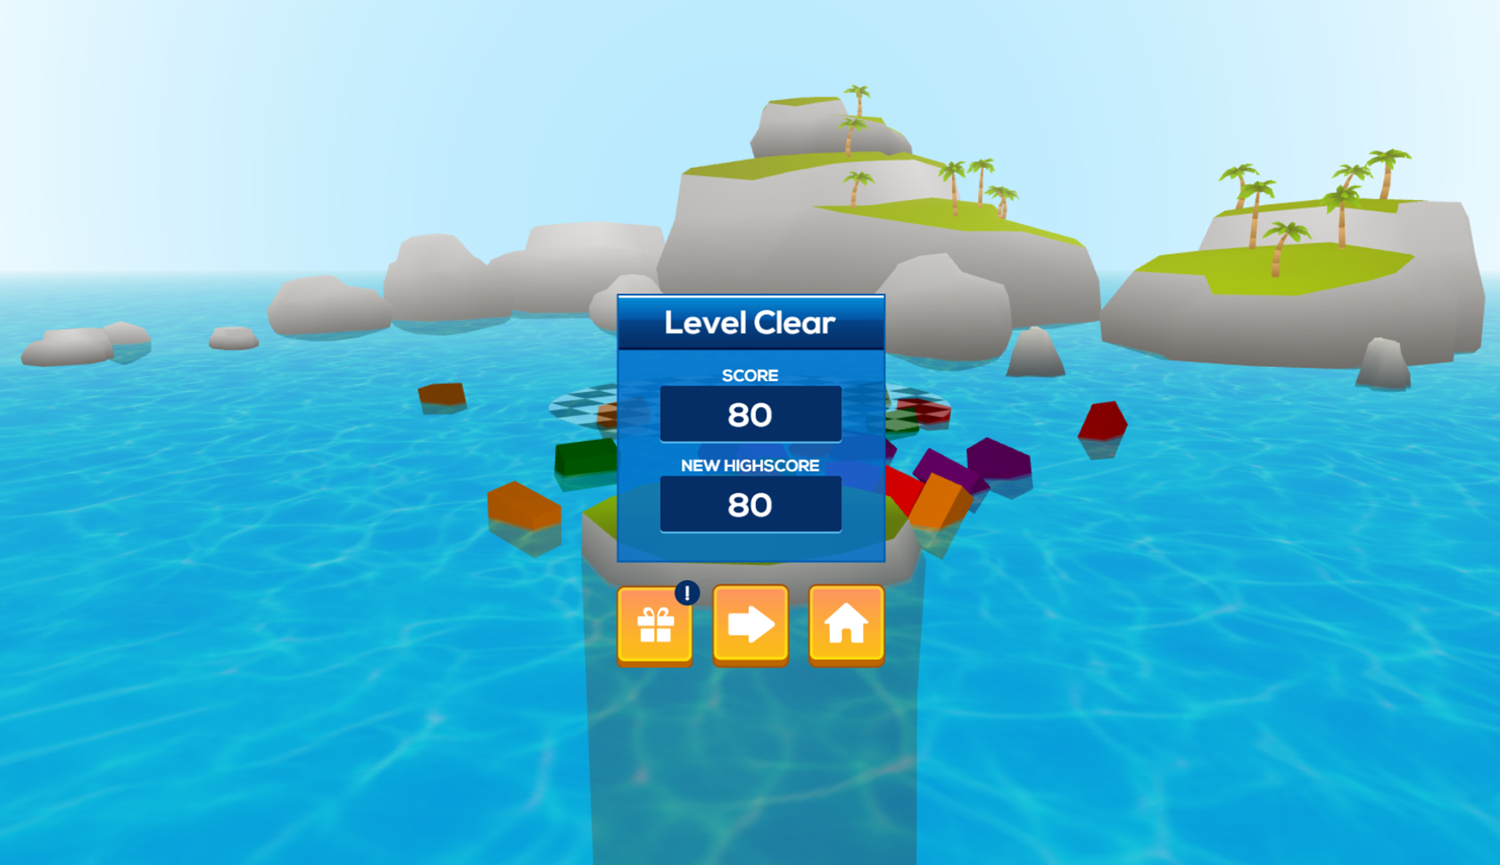 Tower of Colors Island Edition Game Level Clear Screenshot.